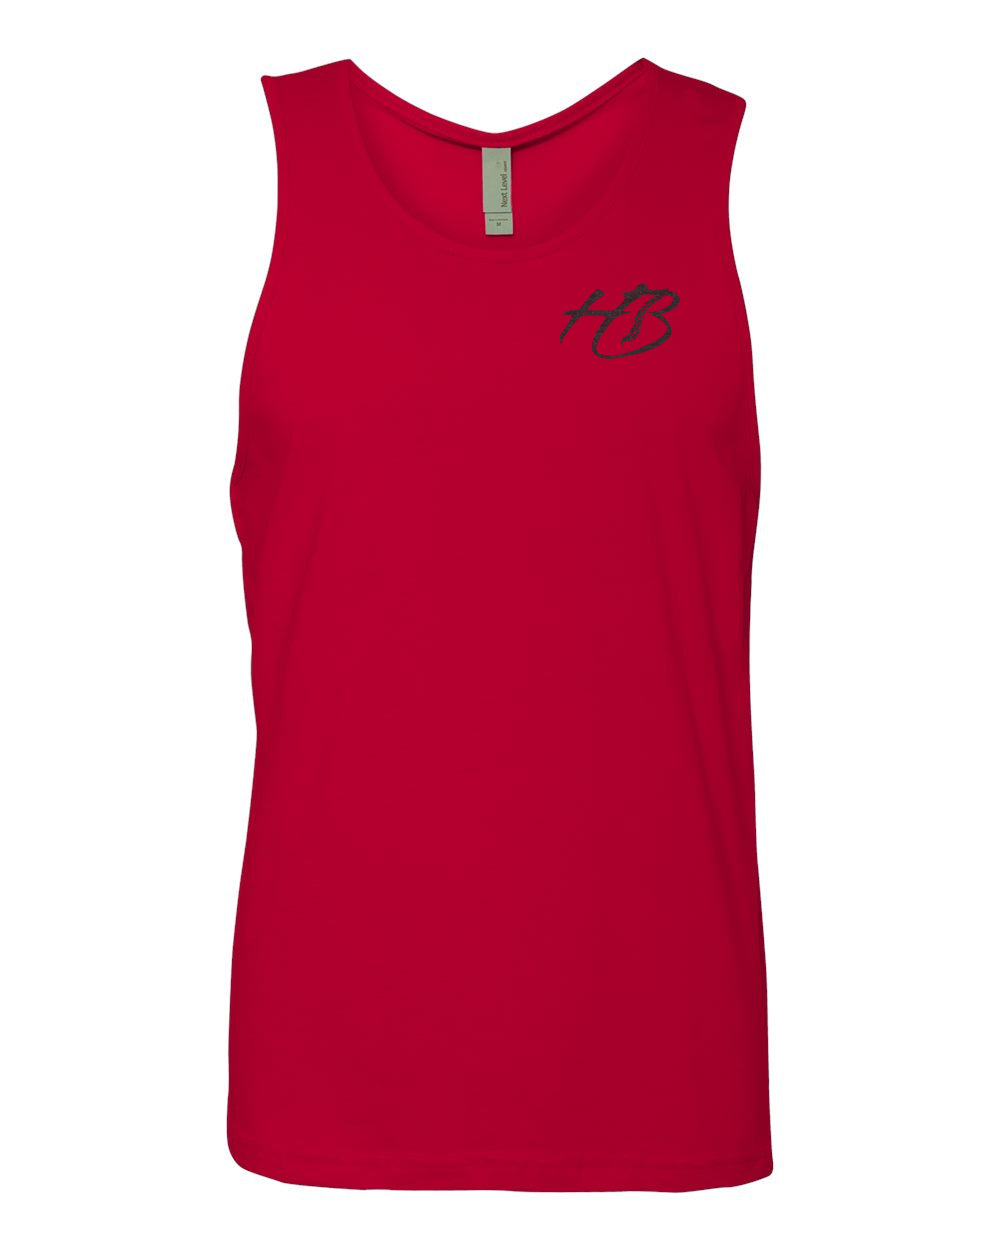 Hollywood Built Muscle Tank / Red